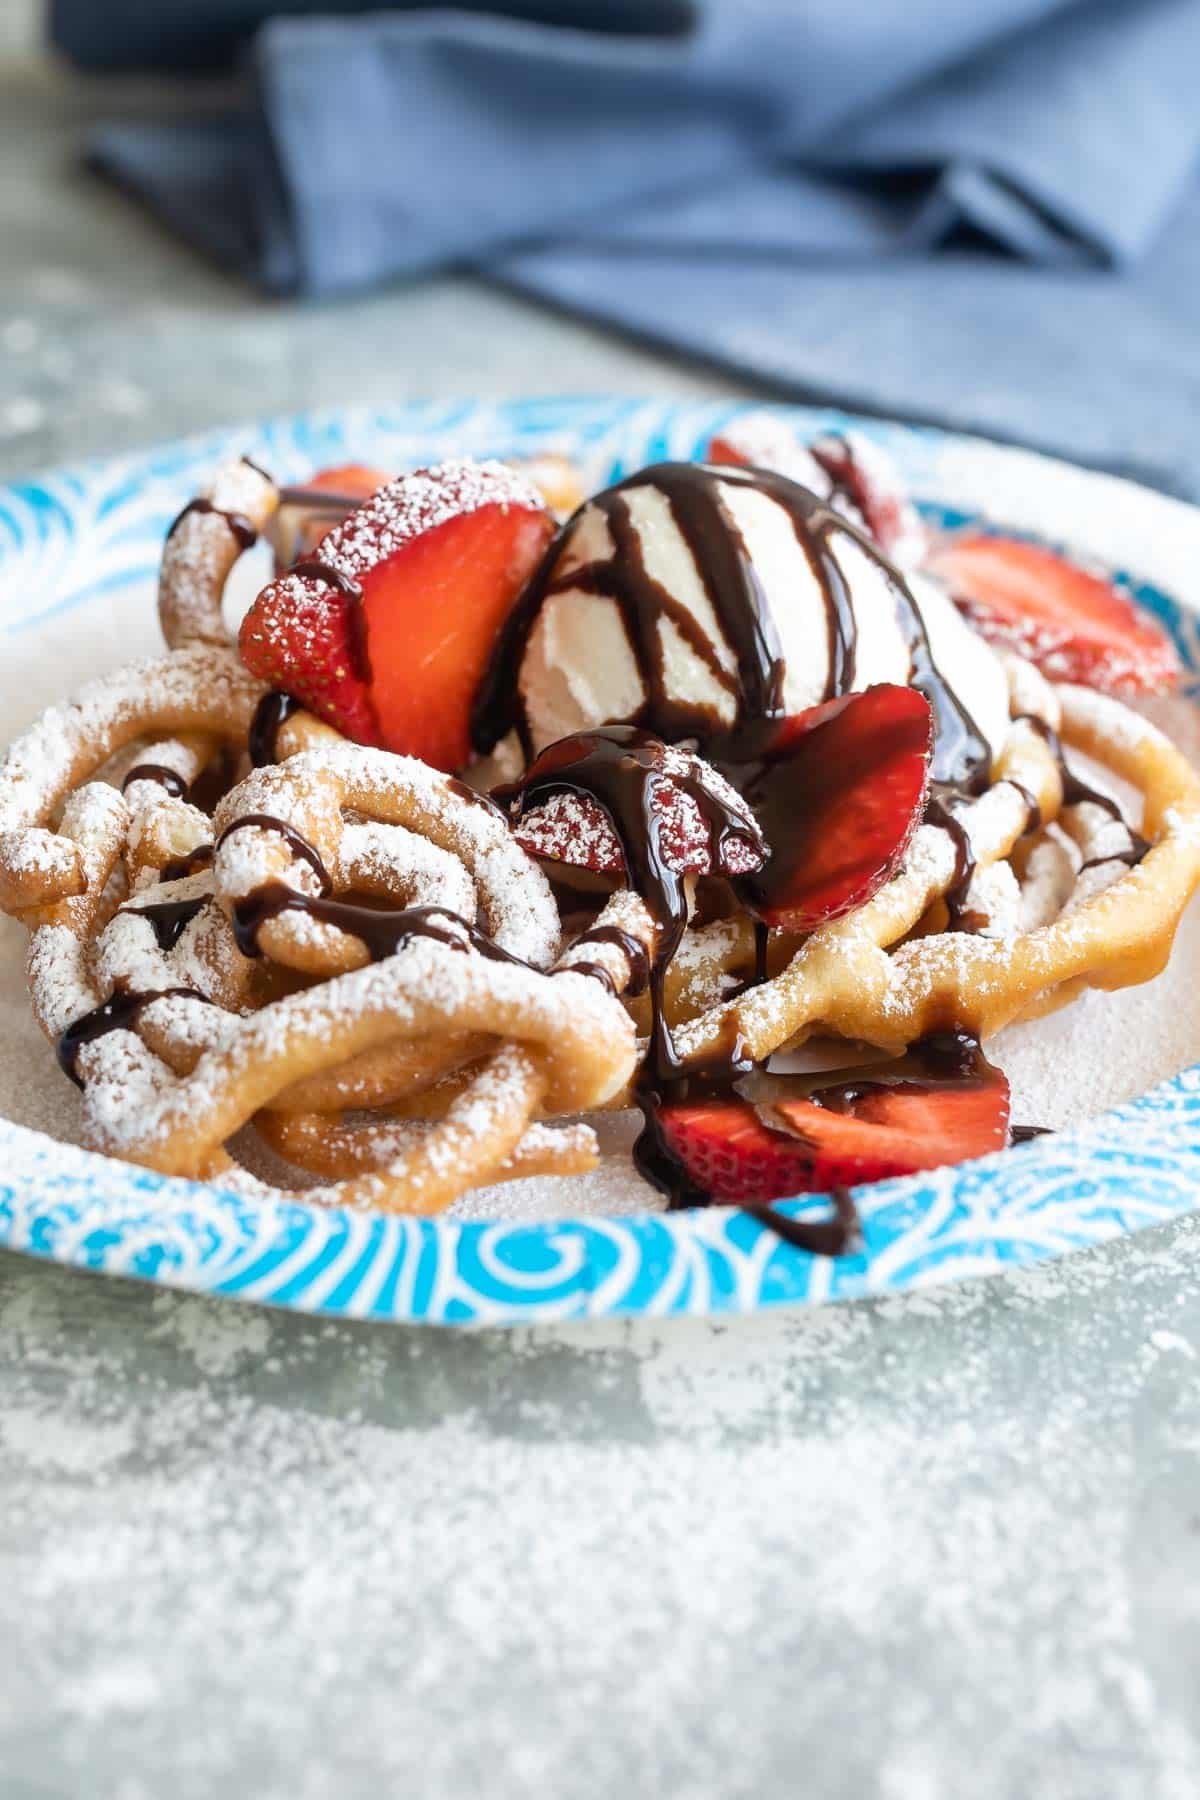 Funnel cakes topped with ice cream, chocolate sauce, and strawberries.